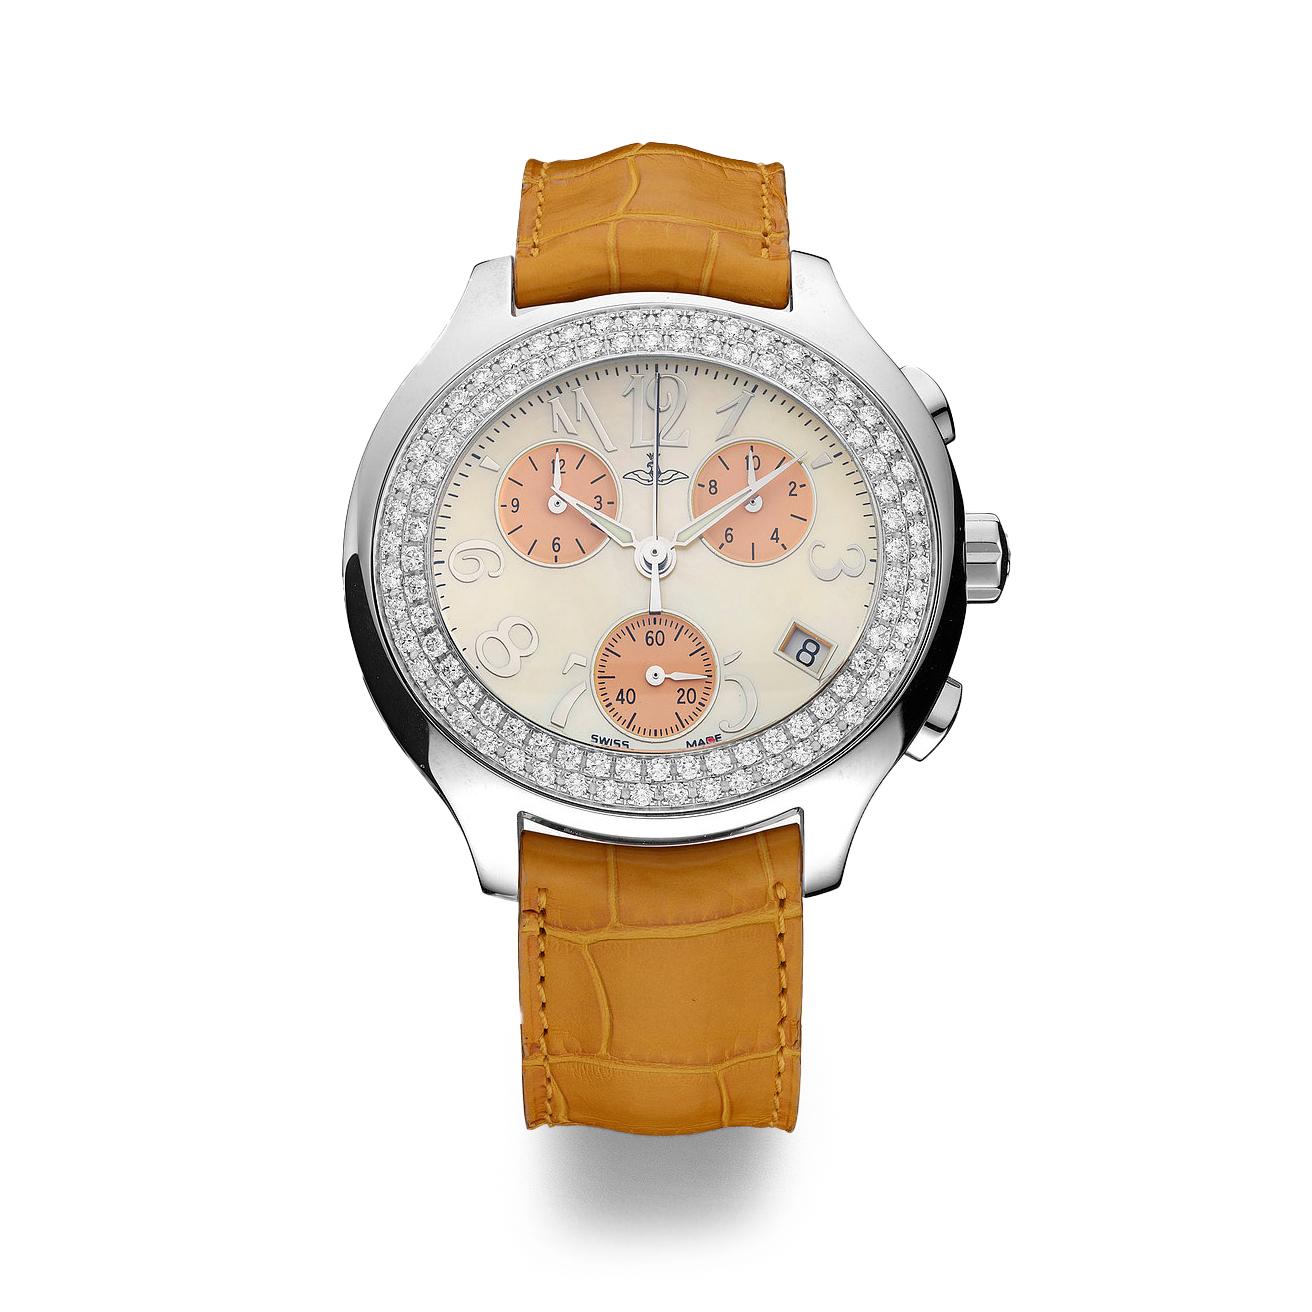 Chronograph watch in steel bezel set with 96 diamonds 1.88 cts orange mother of pearl dial, prong buckle alligator strap quartz movement.